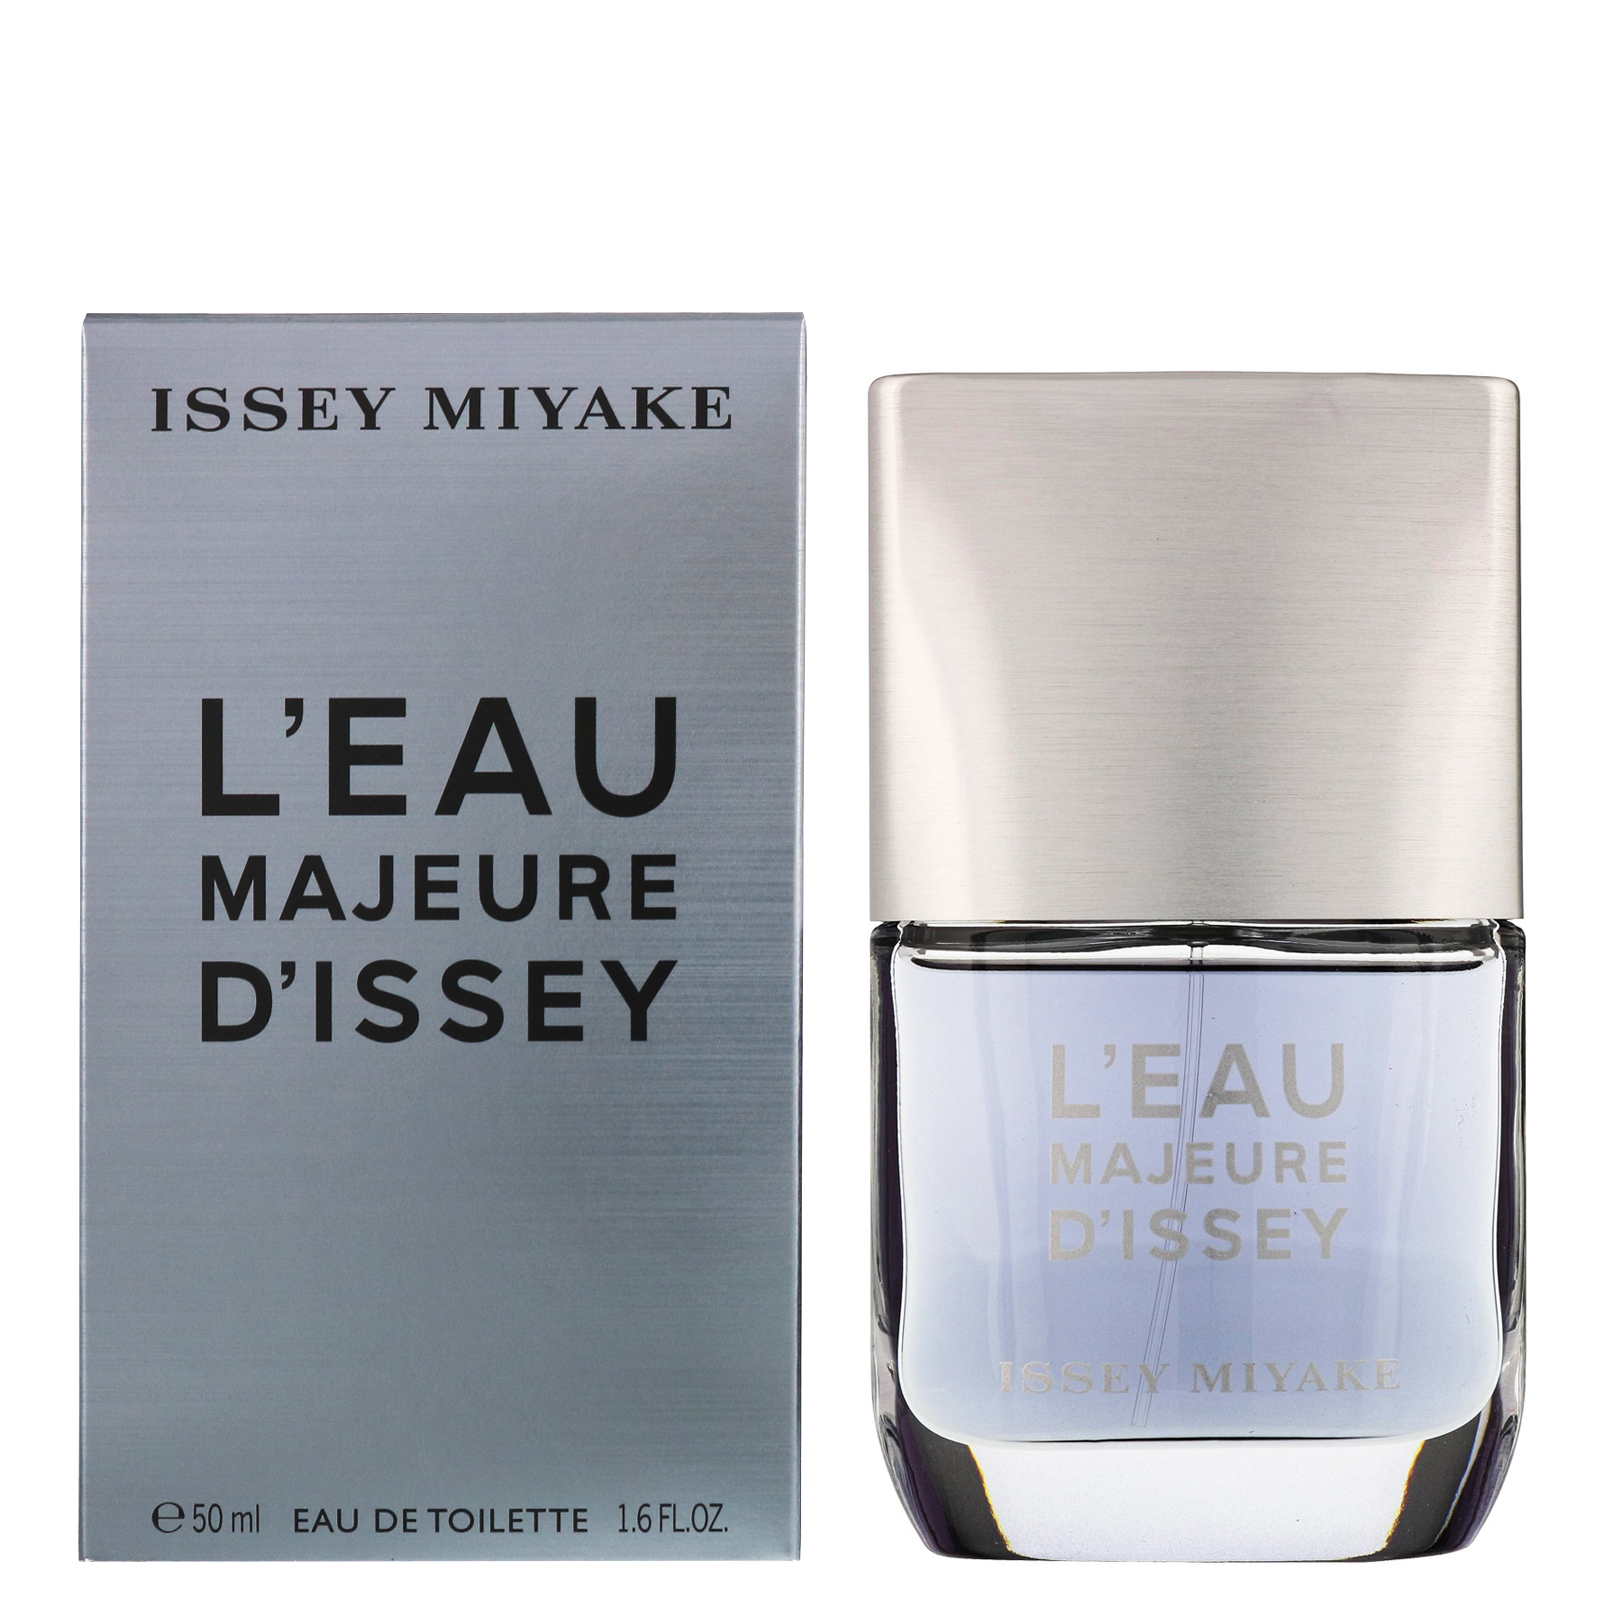 ISSY MIYAKE – L’EAU MAJEURE D’ISSEY EDT 50mL